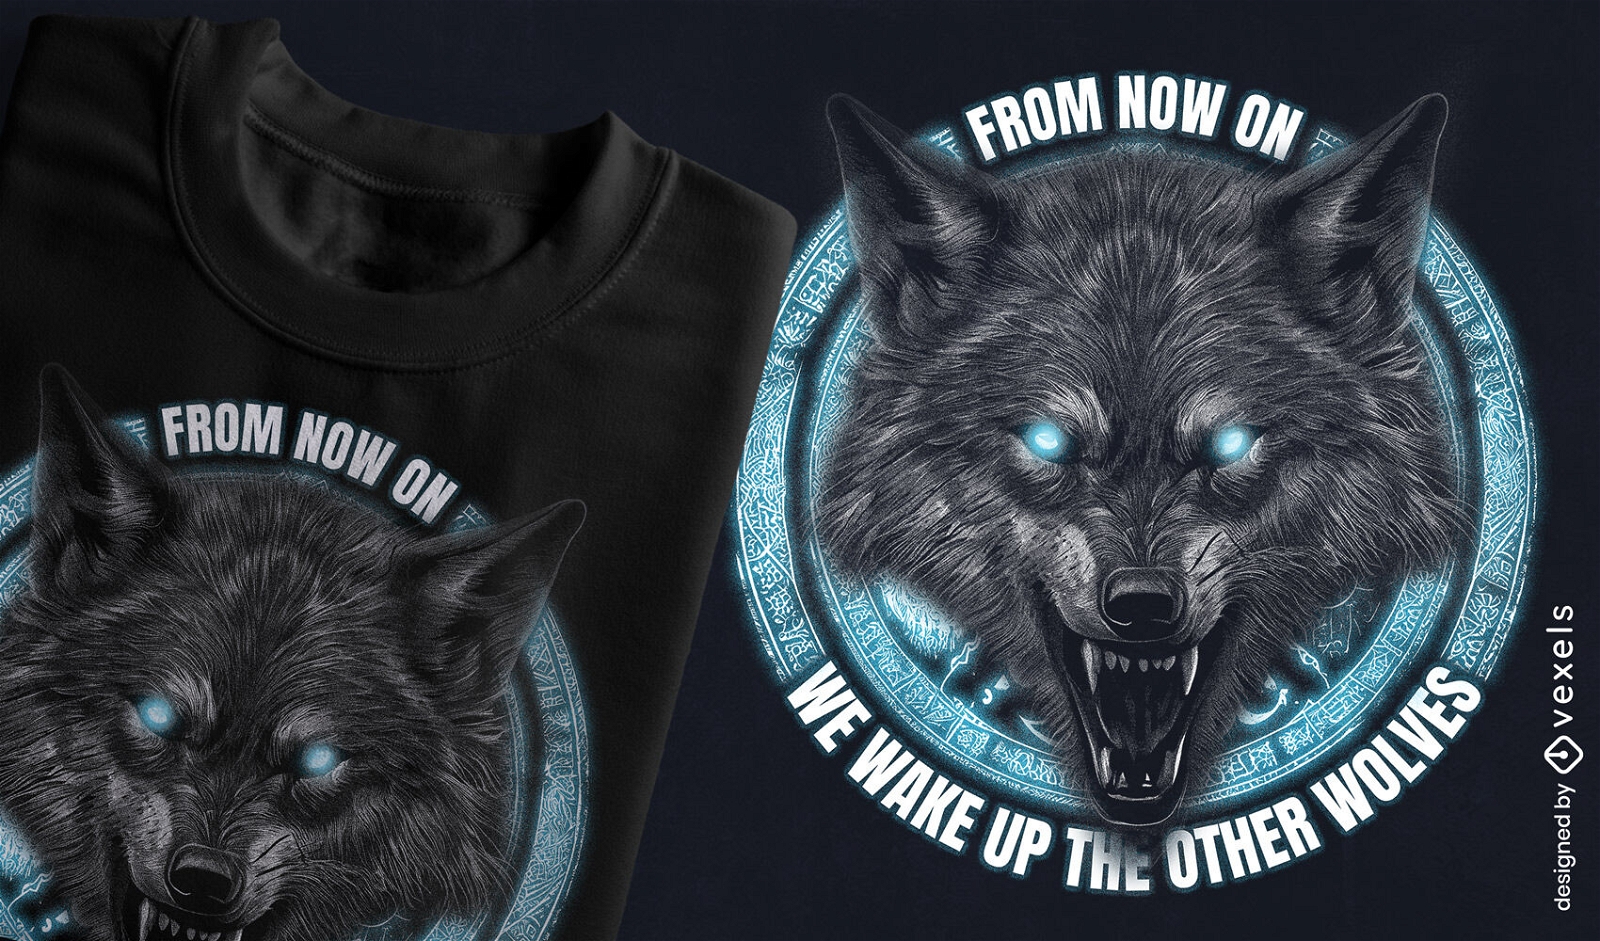 Wake up the wolves quote t-shirt design